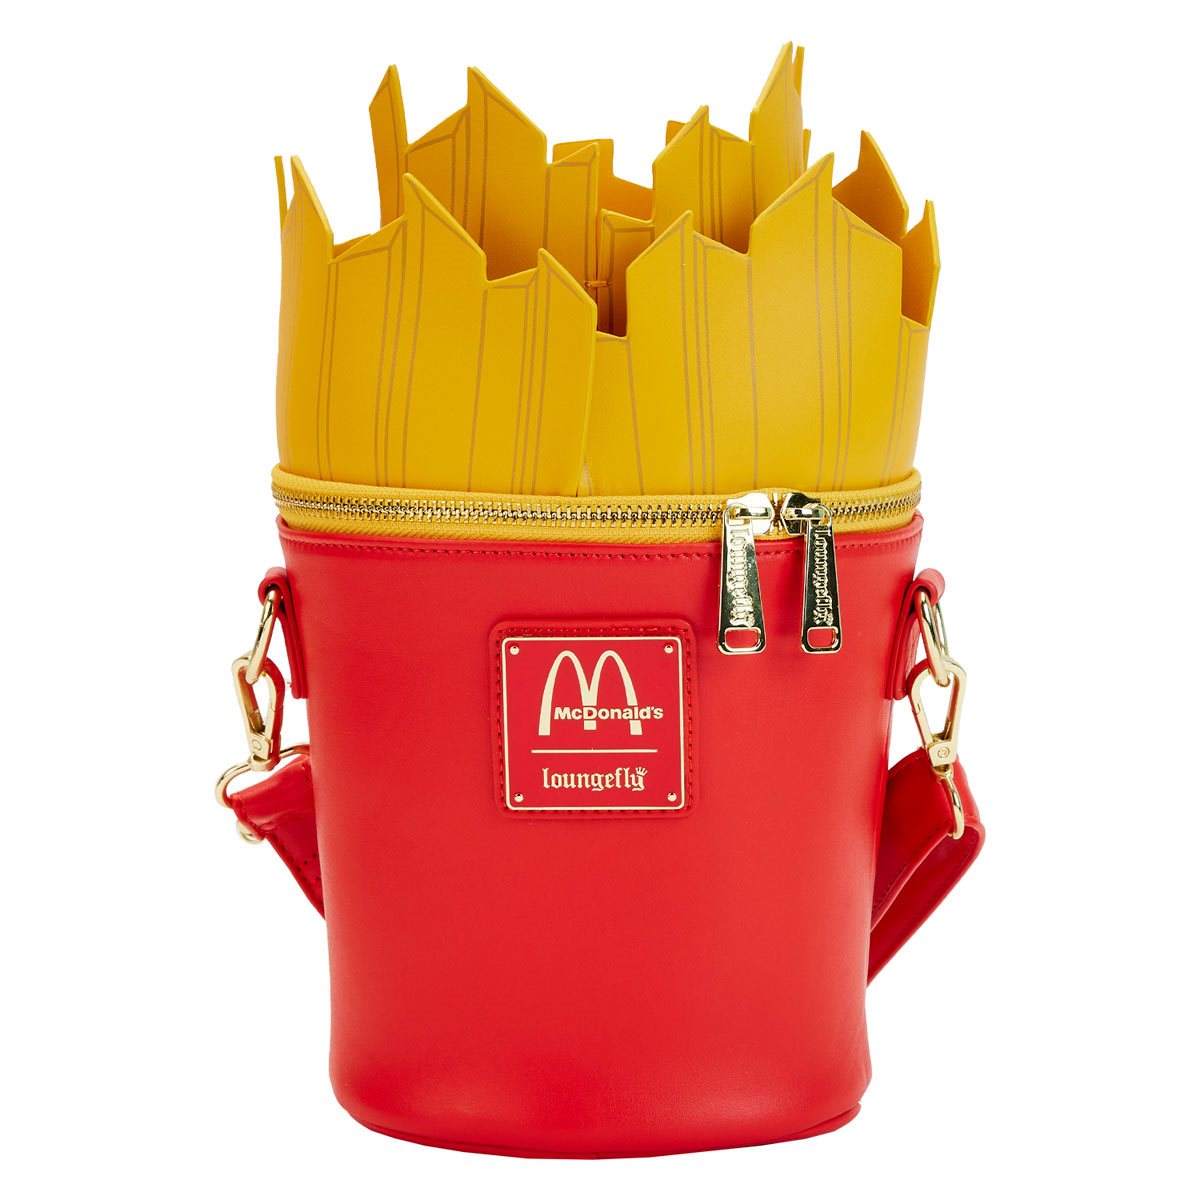 CRAZIEST THING YOU'LL SEE TODAY ASMR UNBOXING! MCDONALDS FRENCH FRY PURSE  BAG BY LOUNGEFLY! 🍟🎒 